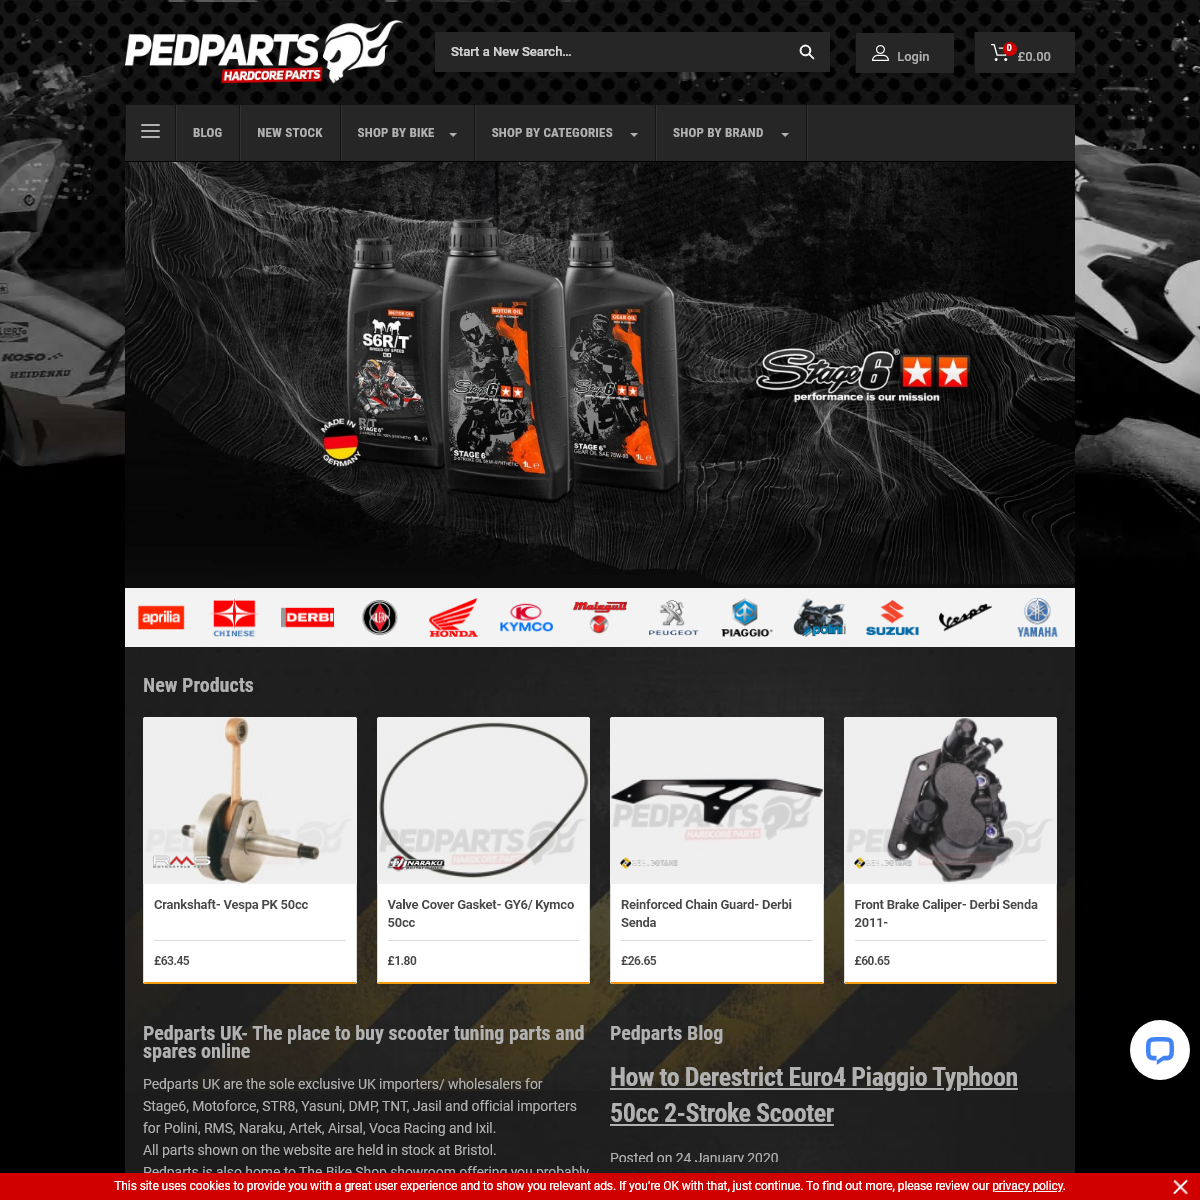 Scooter Spares and Tuning Parts - Pedparts UK